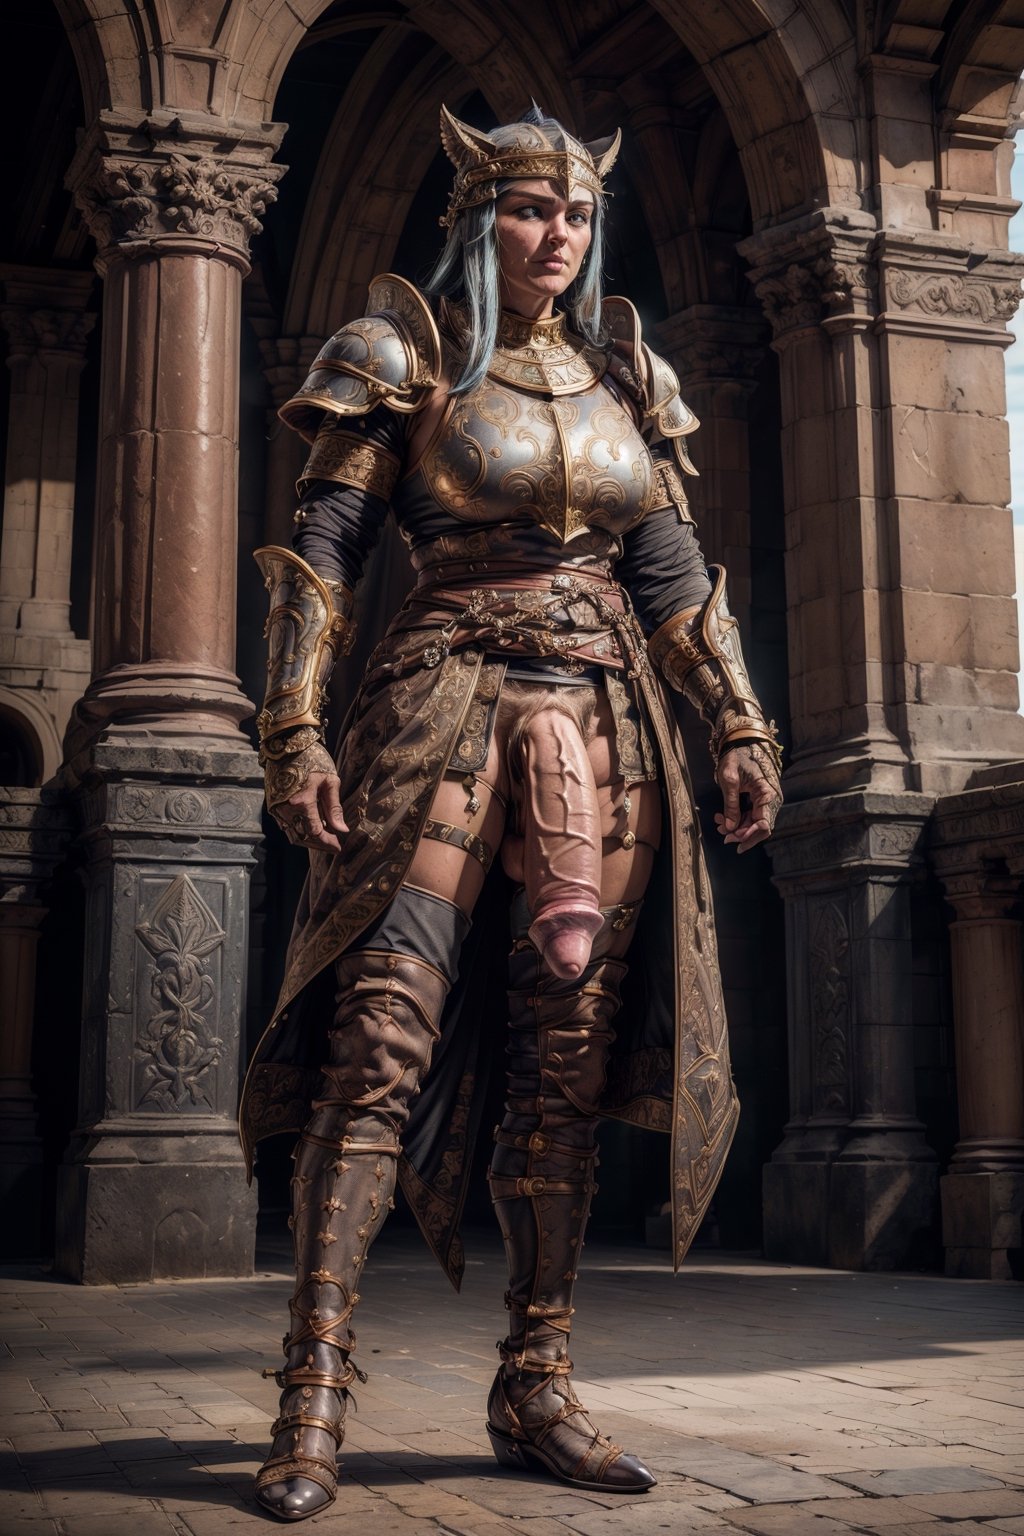 A fearless and battle-hardened female gladiator with steel-blue eyes and unwavering resolve, her bronzed and scarred complexion reveals the countless battles she’s faced. She maintains a stoic and determined expression, her intricate Roman-style helmet perched atop her head, while her practical hair is tied up. Her strong and athletic body is marked by muscular arms and legs, the result of rigorous training, and she bears tattoos symbolizing her many victories. Carrying a gladius sword, she strikes a confident and resolute stance, always ready for combat in the arena. Surrounded by sand underfoot, the arena’s backdrop includes a roaring crowd in the stands, adding to the anticipation. She wears leather armor for protection, consisting of a bronze breastplate with intricate engravings, a studded leather skirt for mobility, Roman sandals, and shin guards. In every aspect, she exudes the spirit of a fierce gladiator ready for the ancient battle. flaccid

detailed huge penis (flaccid, super detailed, realistic, detailed penile head , (only one), big size)), (penis dripping cum:1.4), testicles, (huge penis:1.5), feminine body, feminine arms, thin arms,

(Full body portait:1.5),

